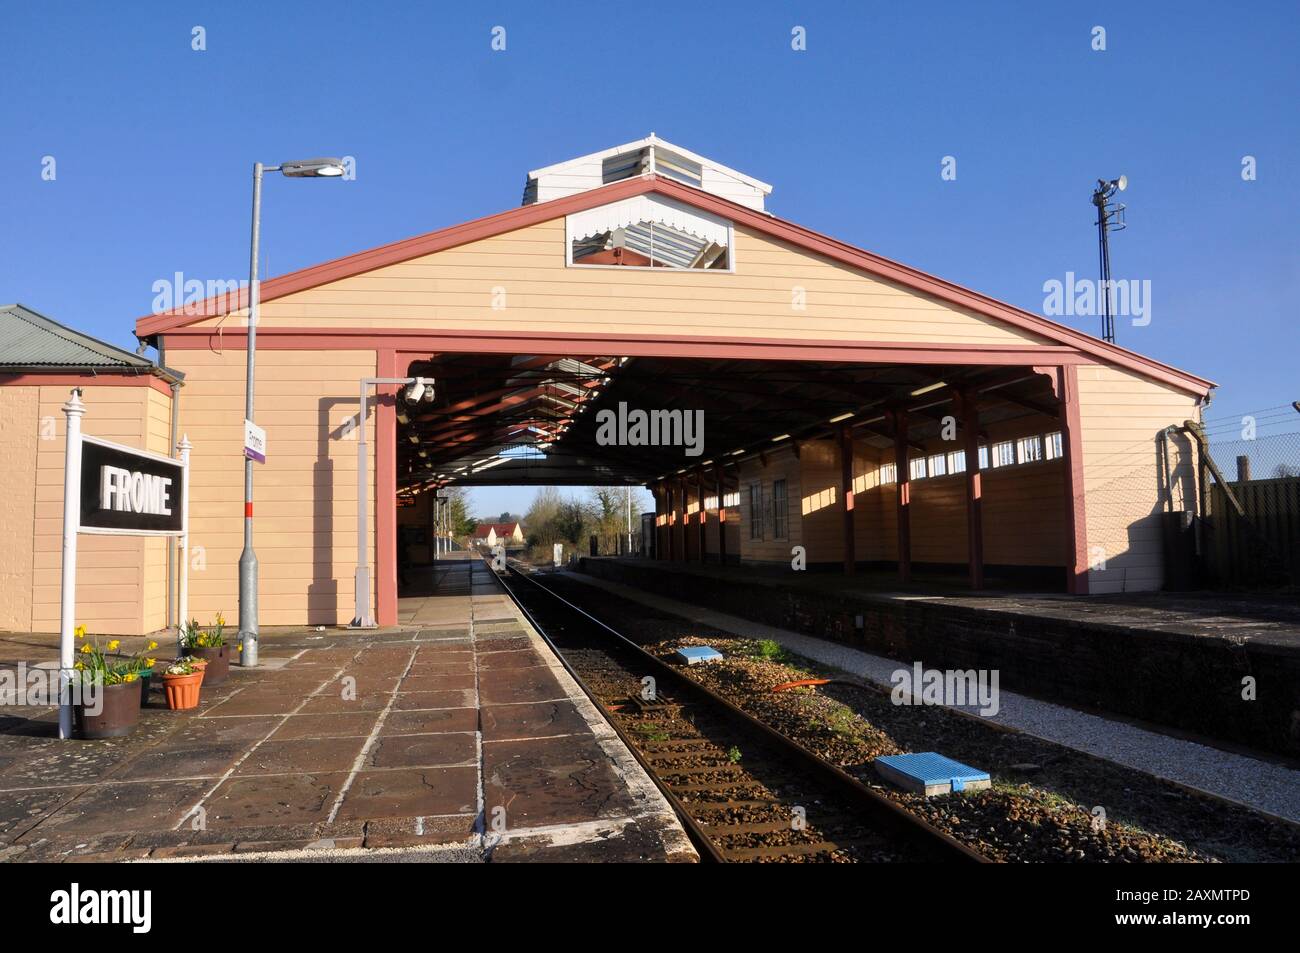 Frome railway station,one of the oldest through train shed railway stations still in use.Wooden construction opened in 1850 to a design by G Hannaford Stock Photo